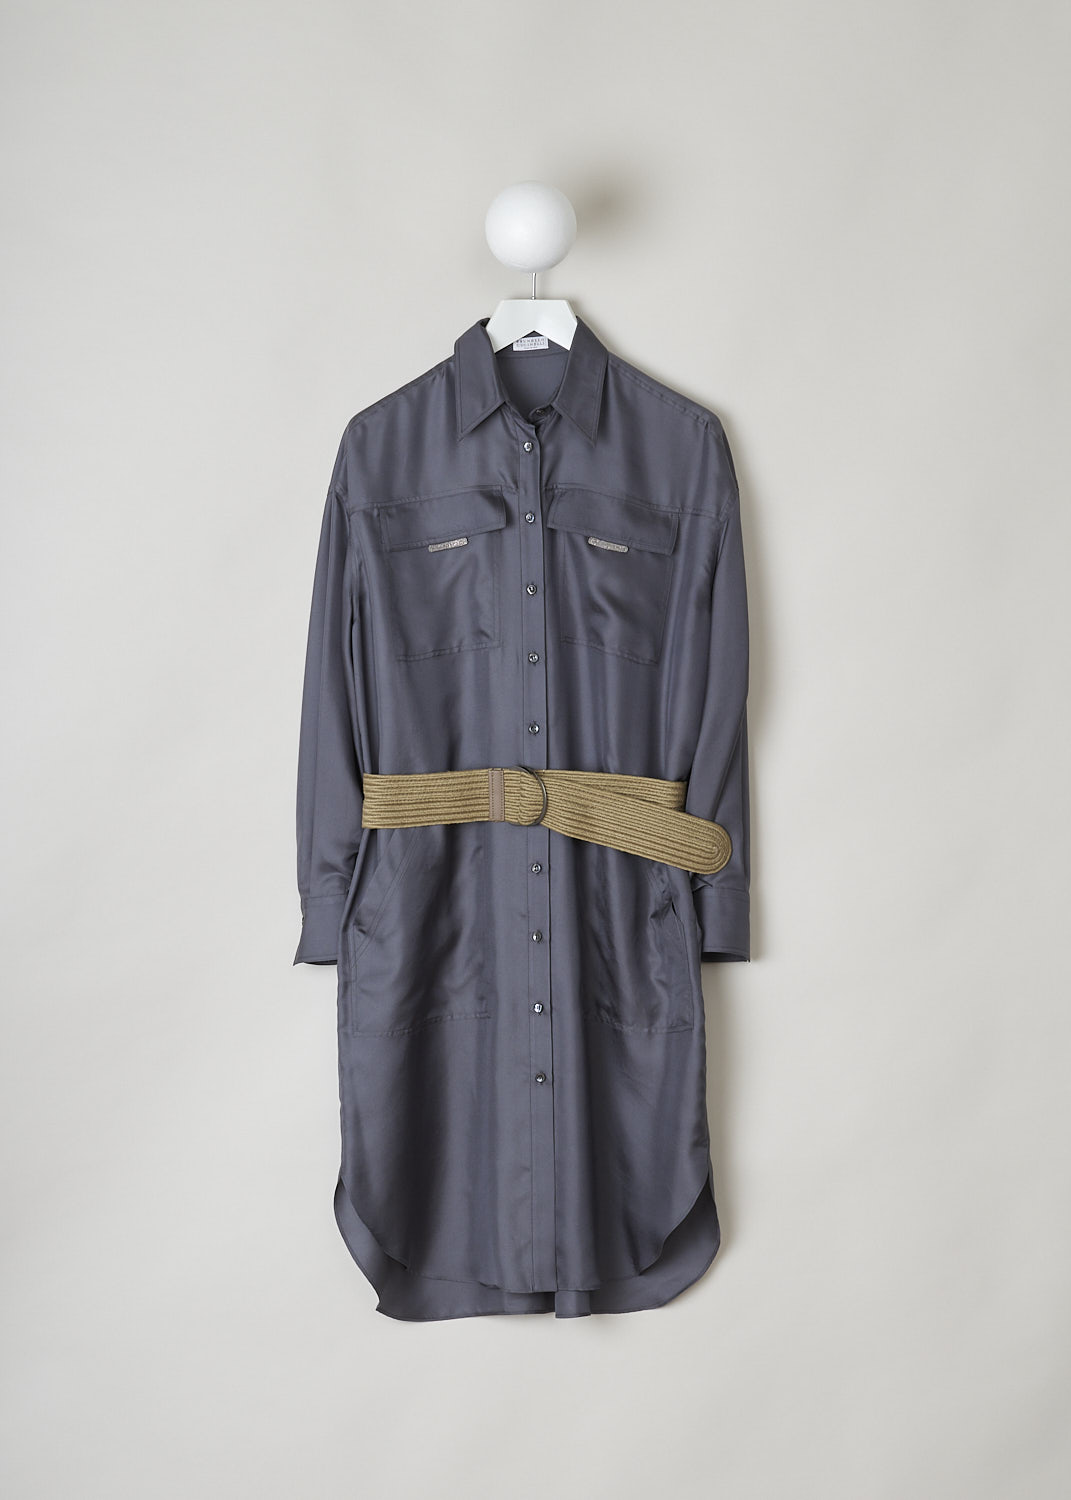 BRUNELLO CUCINELLI, ANTHRACITE SHIRT DRESS WITH BRAIDED BELT, MB953MY306_C079, Grey, Front, This wide anthracite shirt dress has a classic collar a front button closure. The long sleeves have buttoned cuffs. The dress has four stitched on pockets: two monili decorated breast pockets with flap and two slanted patch pockets. The dress has a rounded hemline with an asymmetrical finish, meaning the back is a little longer than the front. The dress comes with braided belt.
